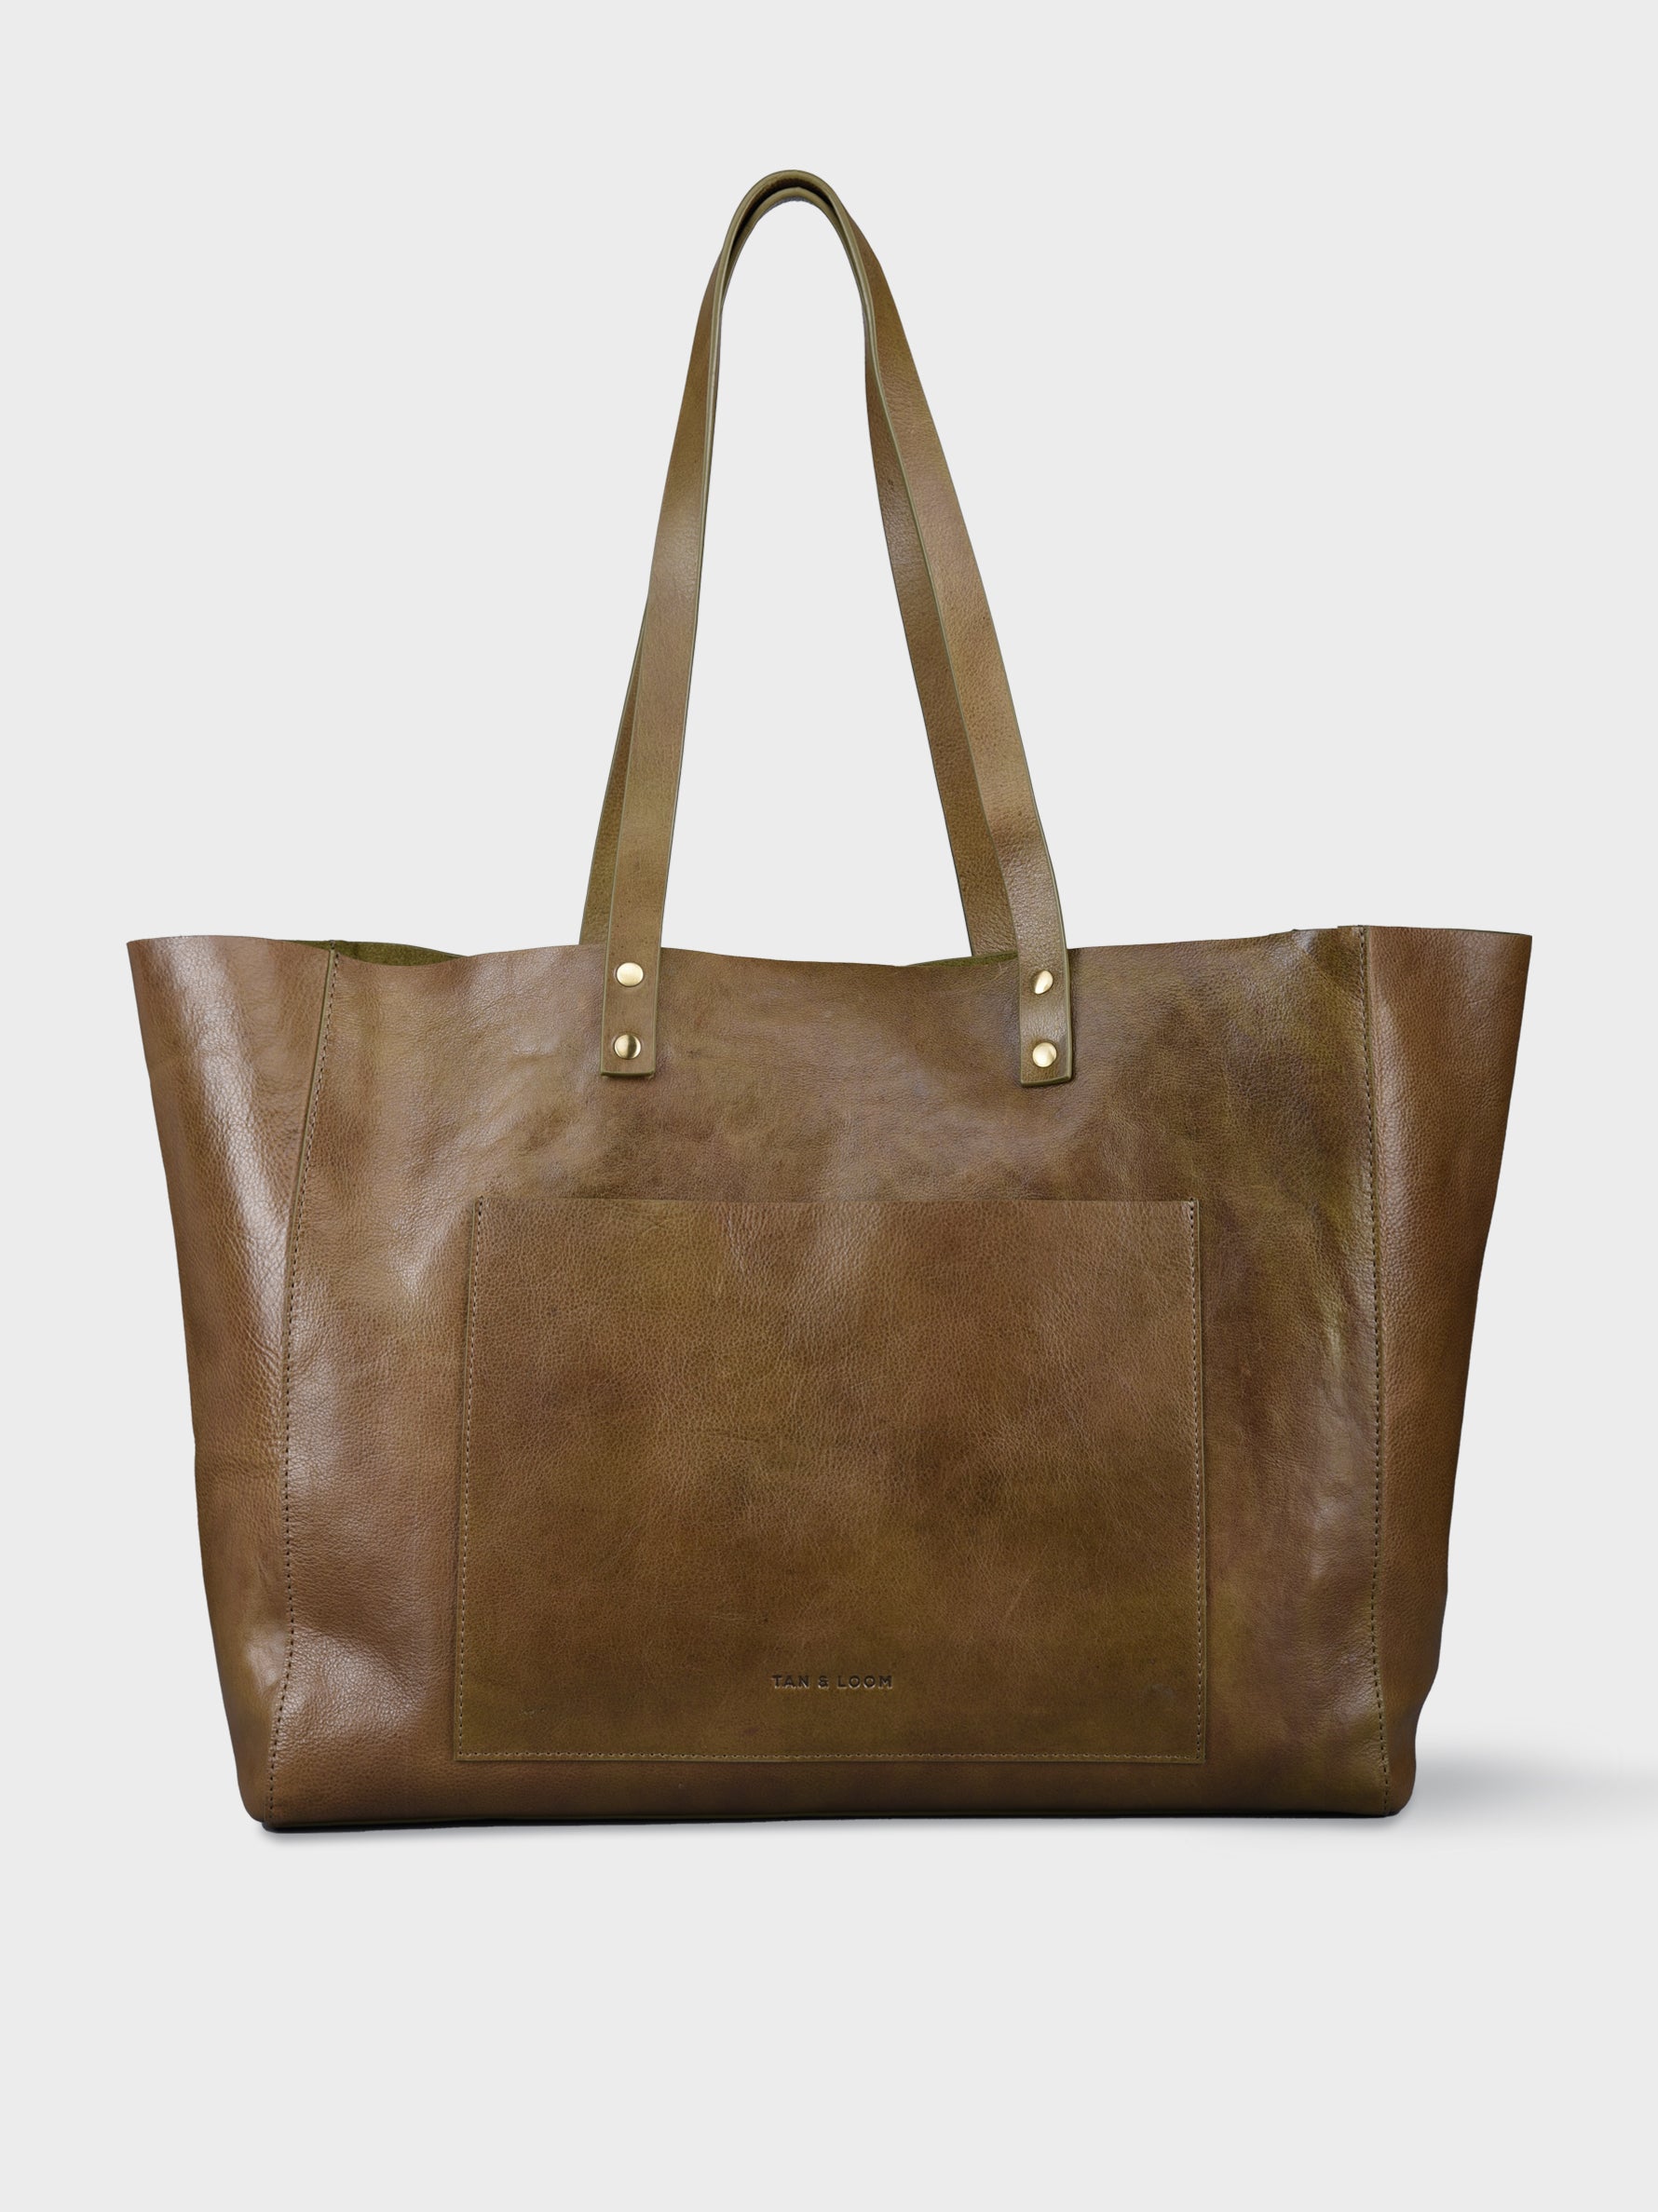 Handcrafted Genuine Vegetable Tanned Leather Old Fashioned Tote Large Olive Green for Women Tan & Loom